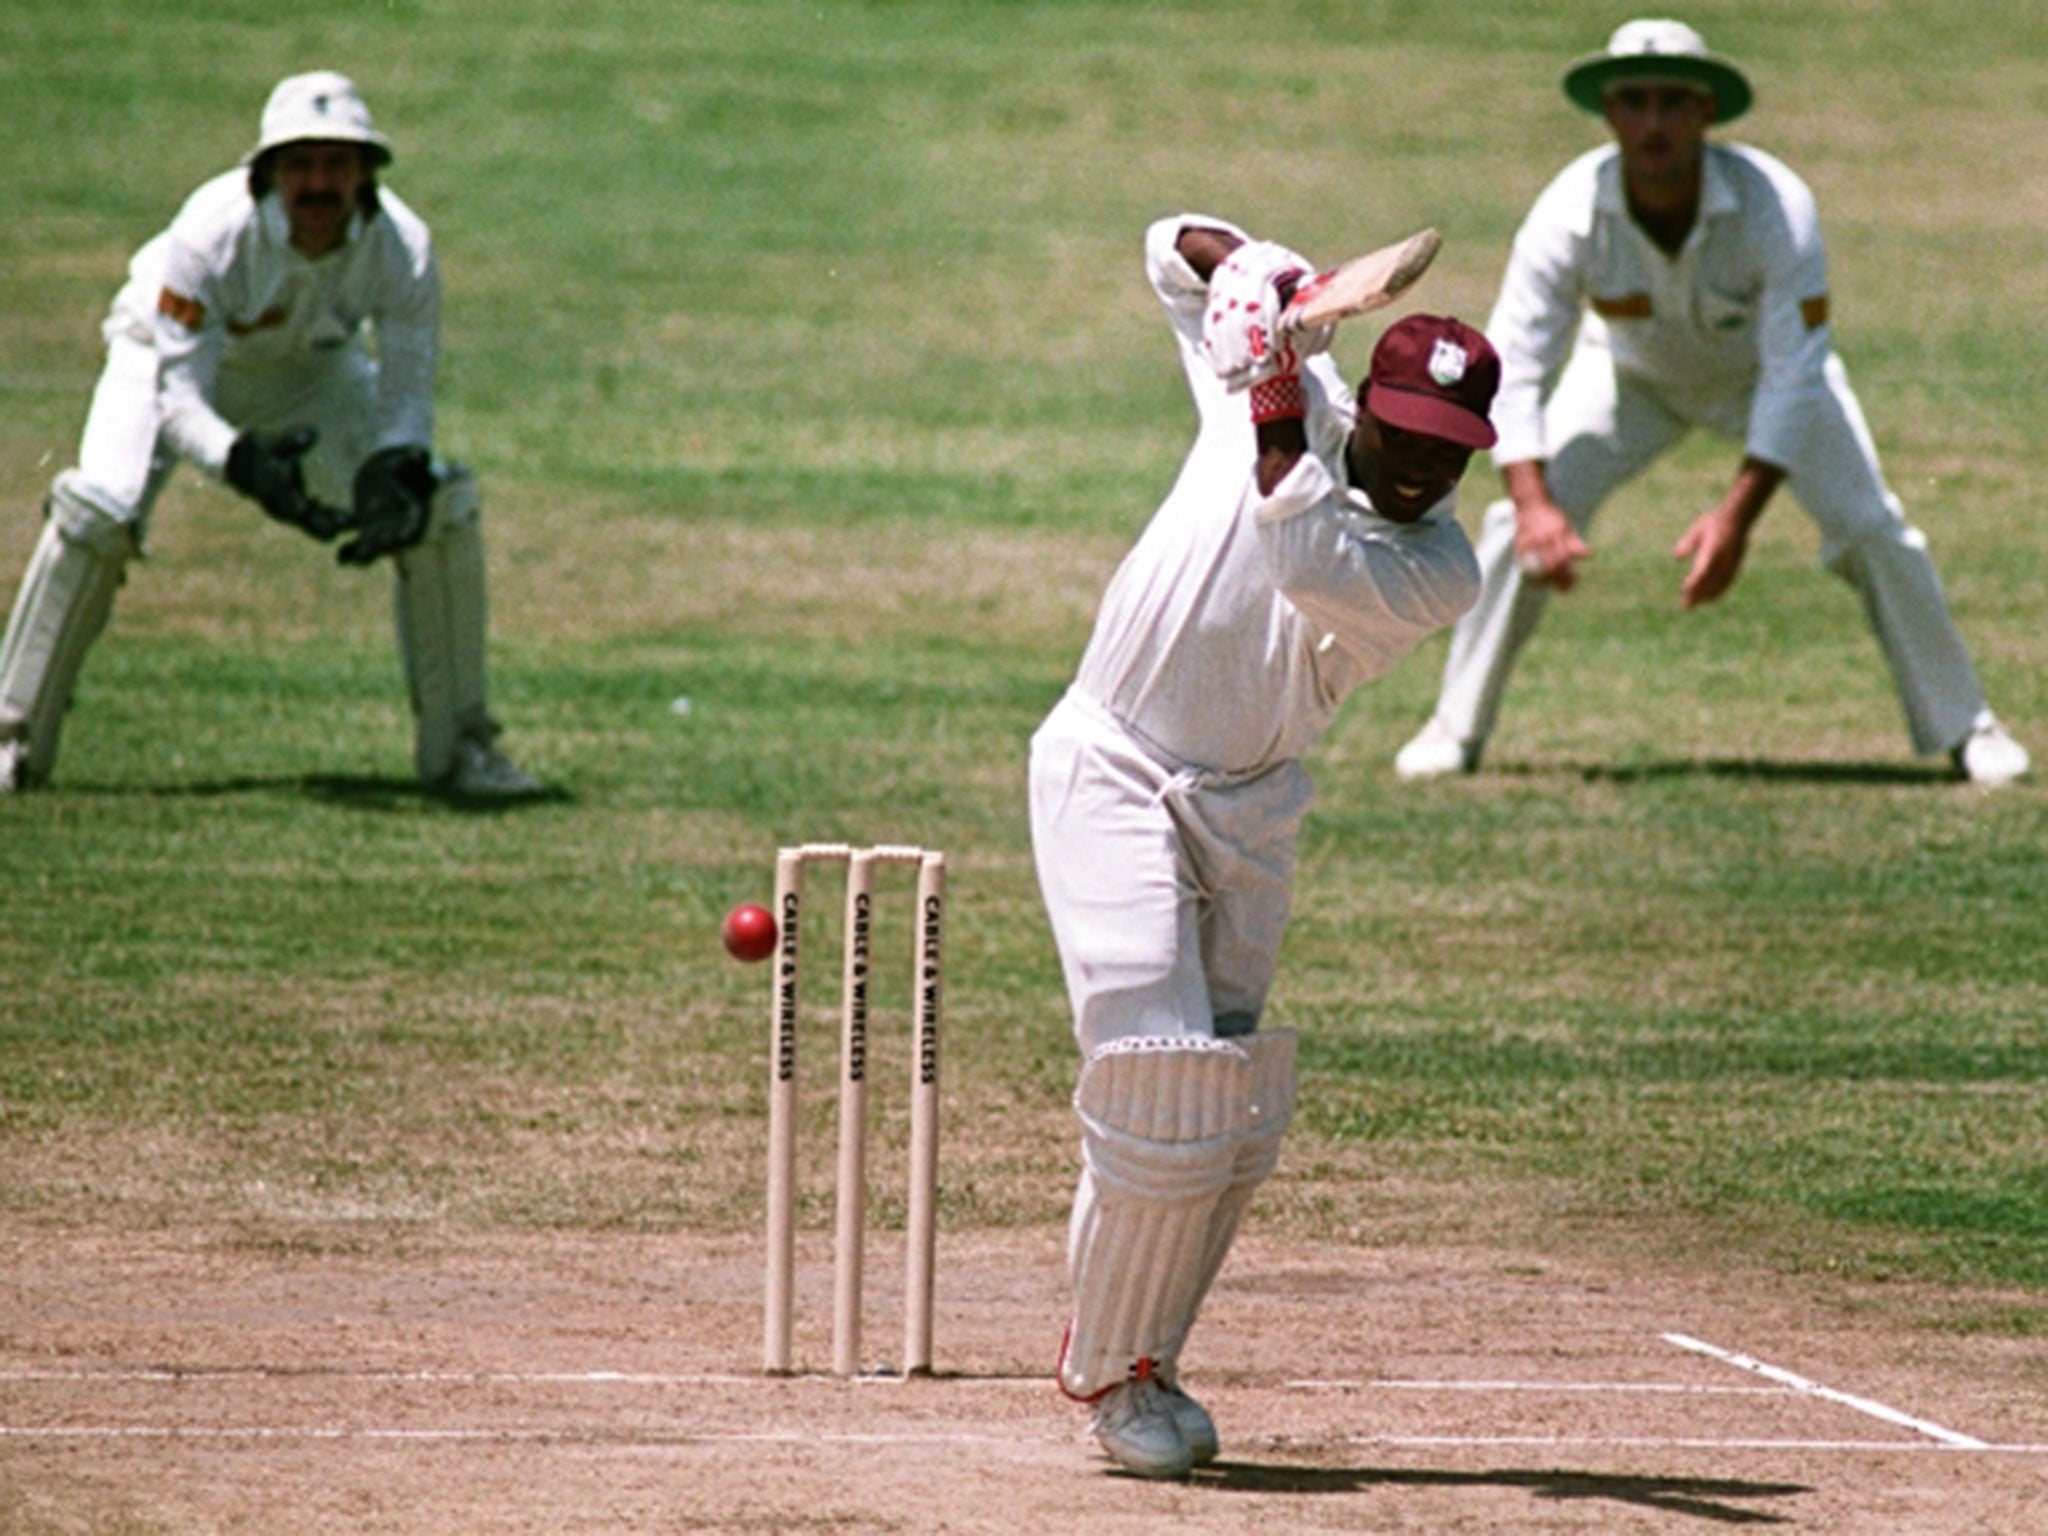 Brian Lara playing his usual lefthanded shot – unlike a picture we used in the 1990s